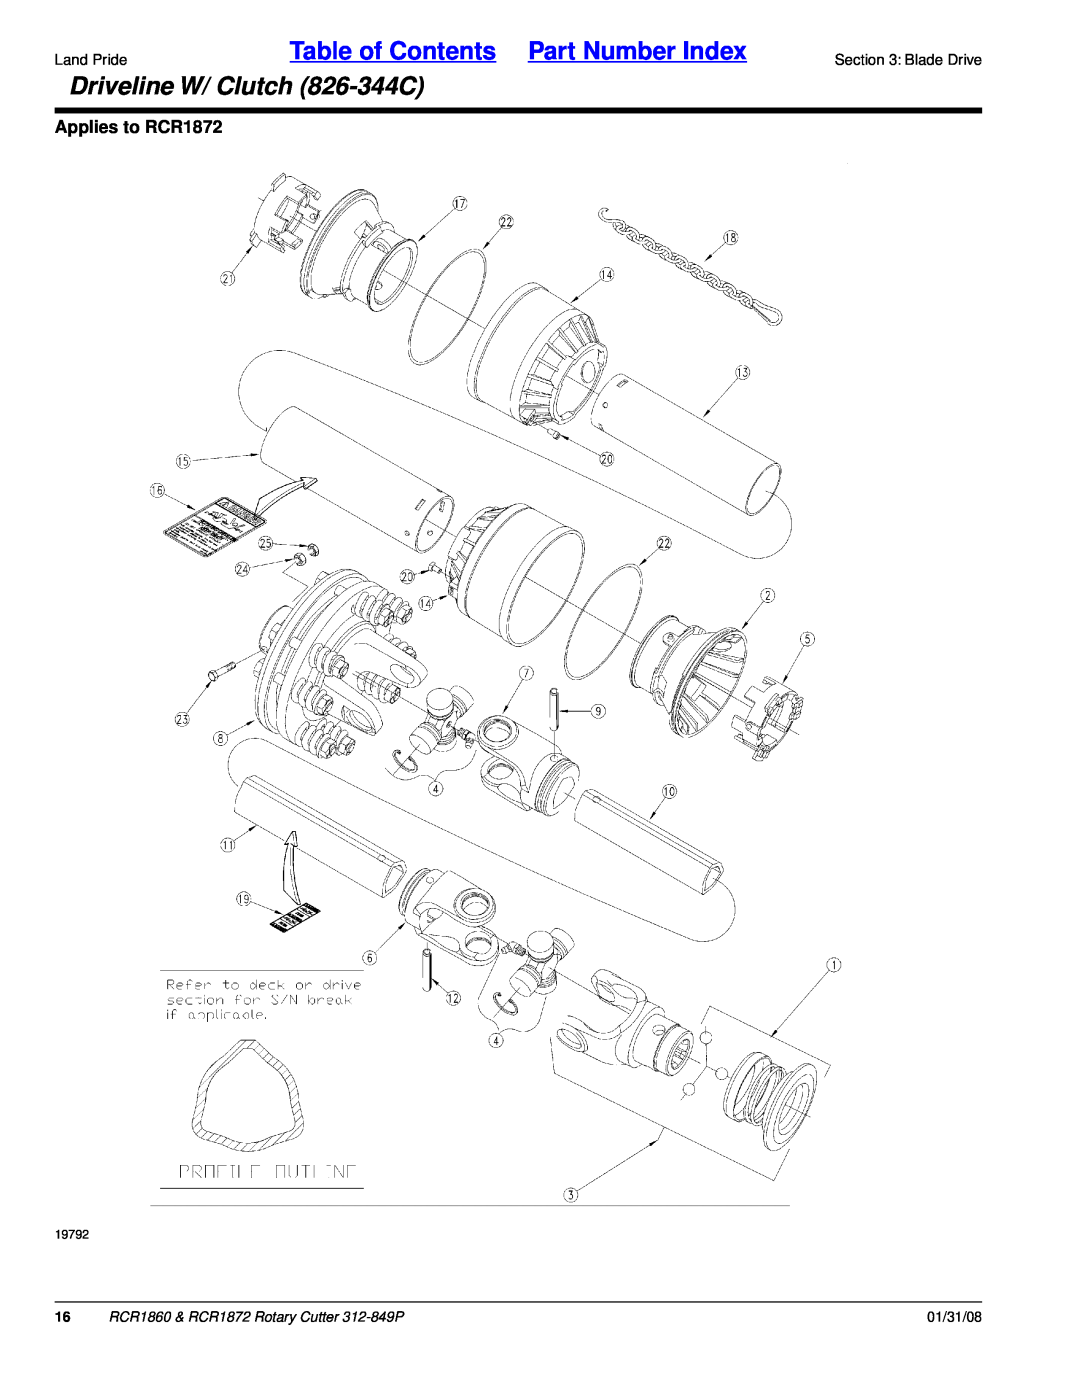 Land Pride RCR1860 manual Driveline W/ Clutch 826-344C, Applies to RCR1872, Table of Contents Part Number Index, 01/31/08 